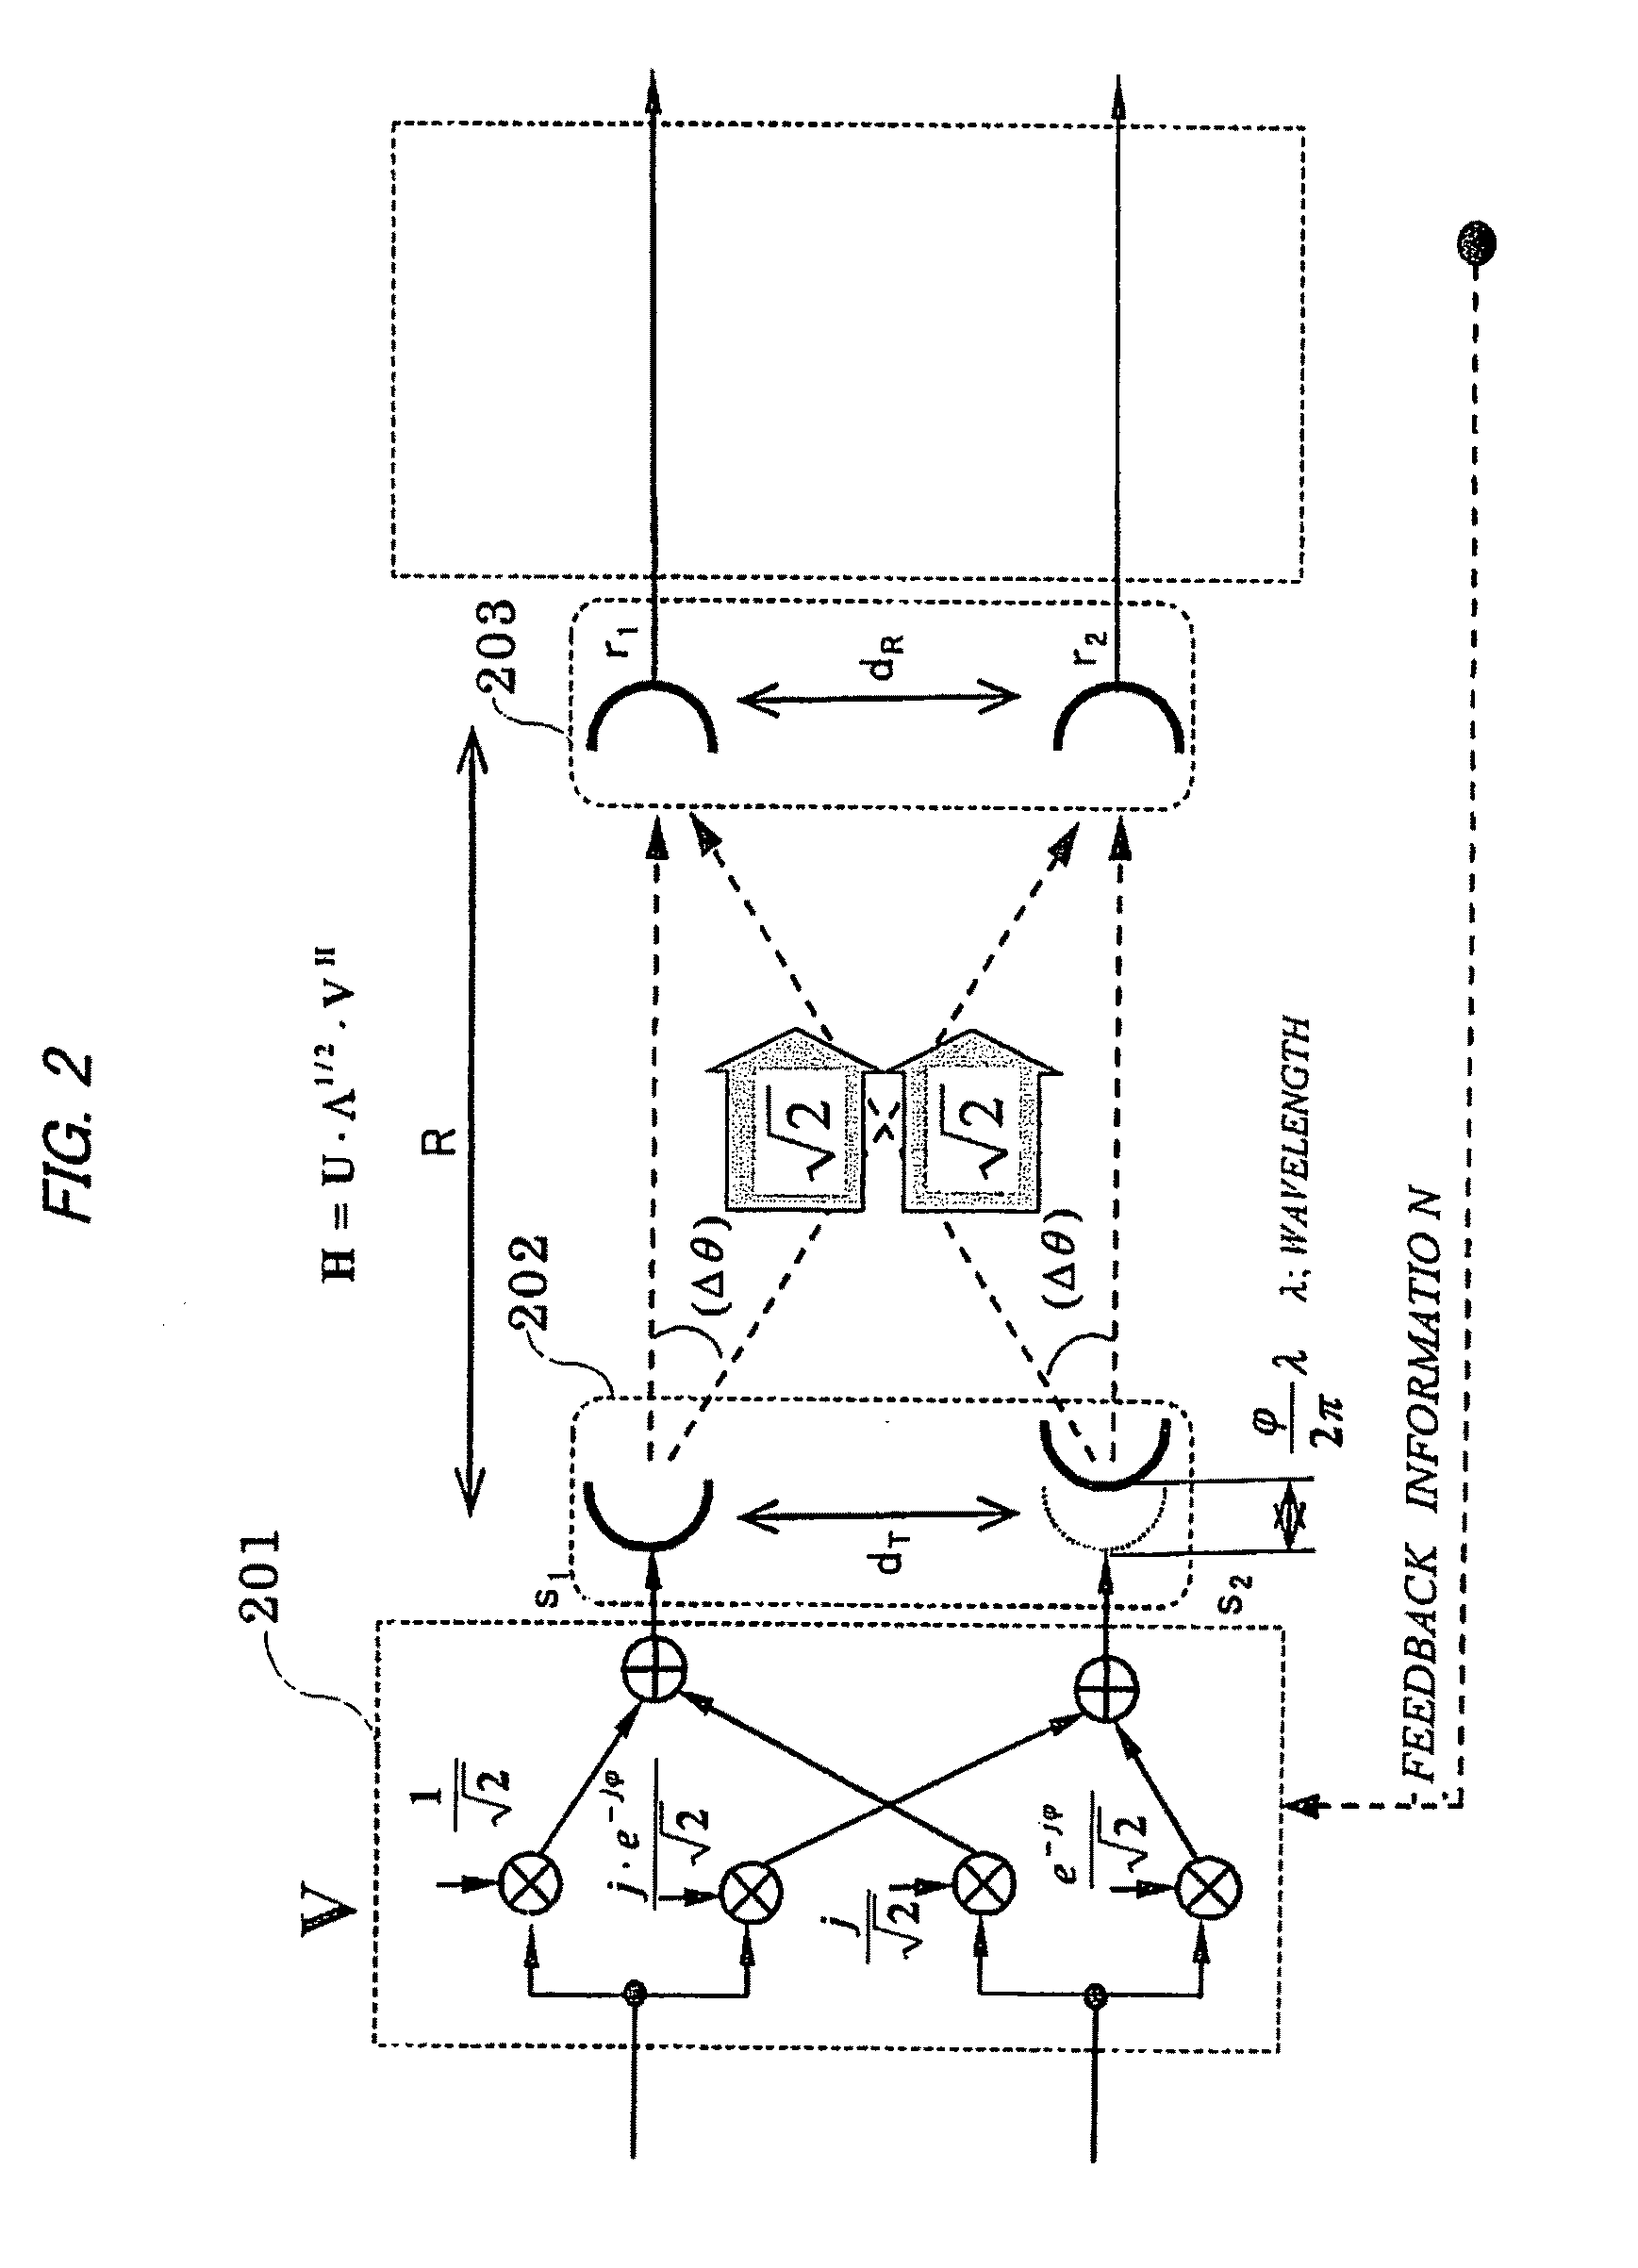 MIMO communication system having deterministic communication path   and antenna arrangement method therfor